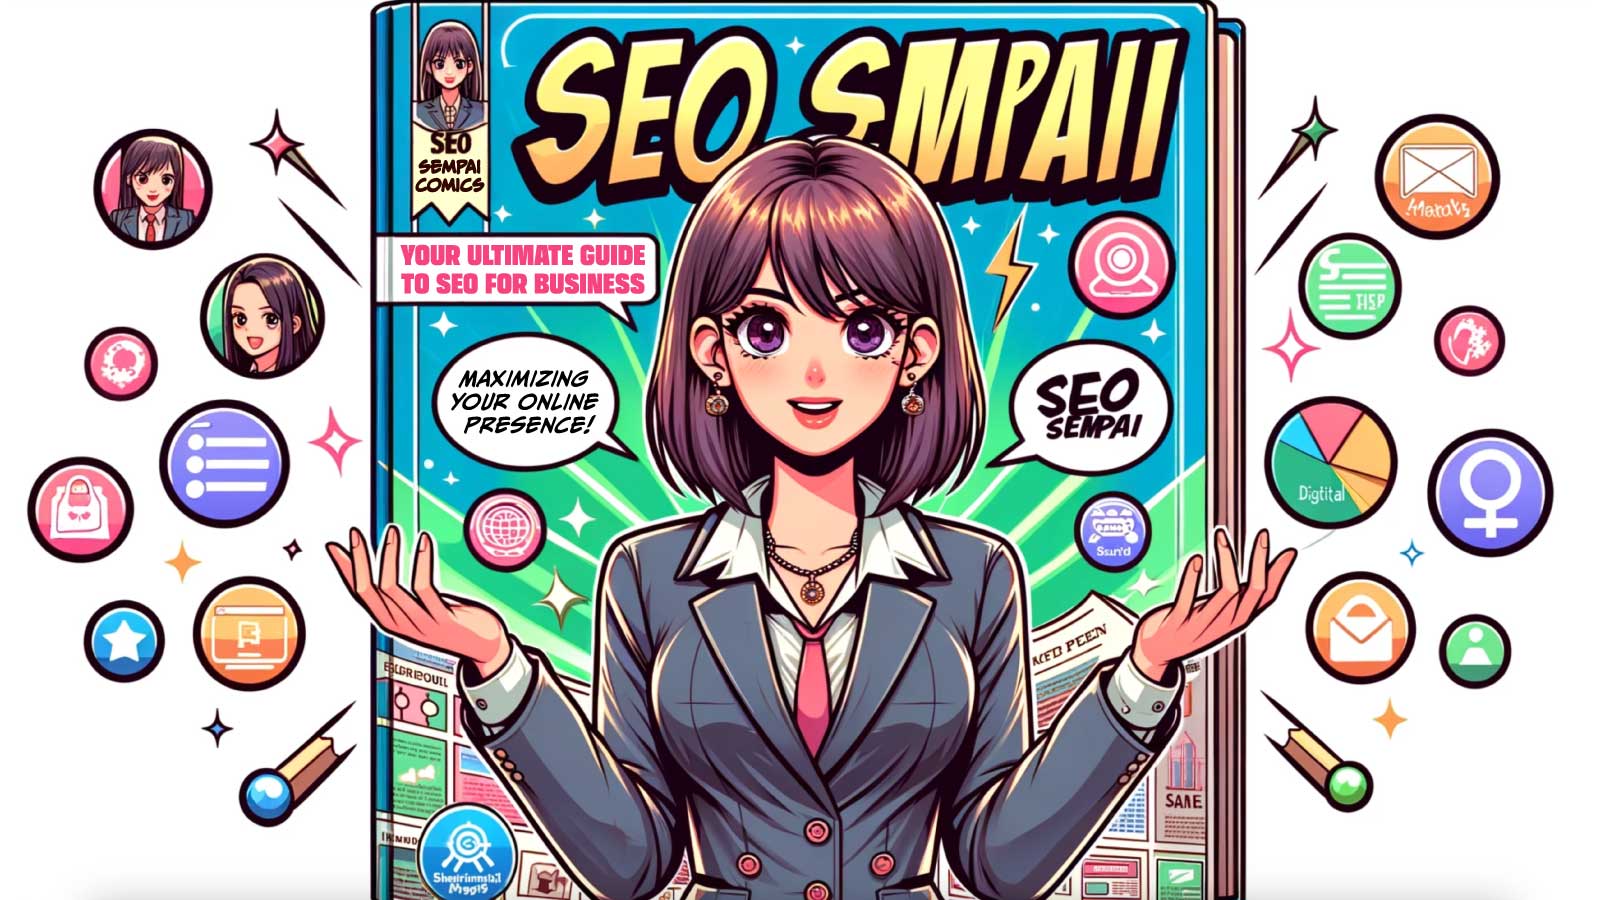 SEO Sempai is your ultimate guide to SEO for business